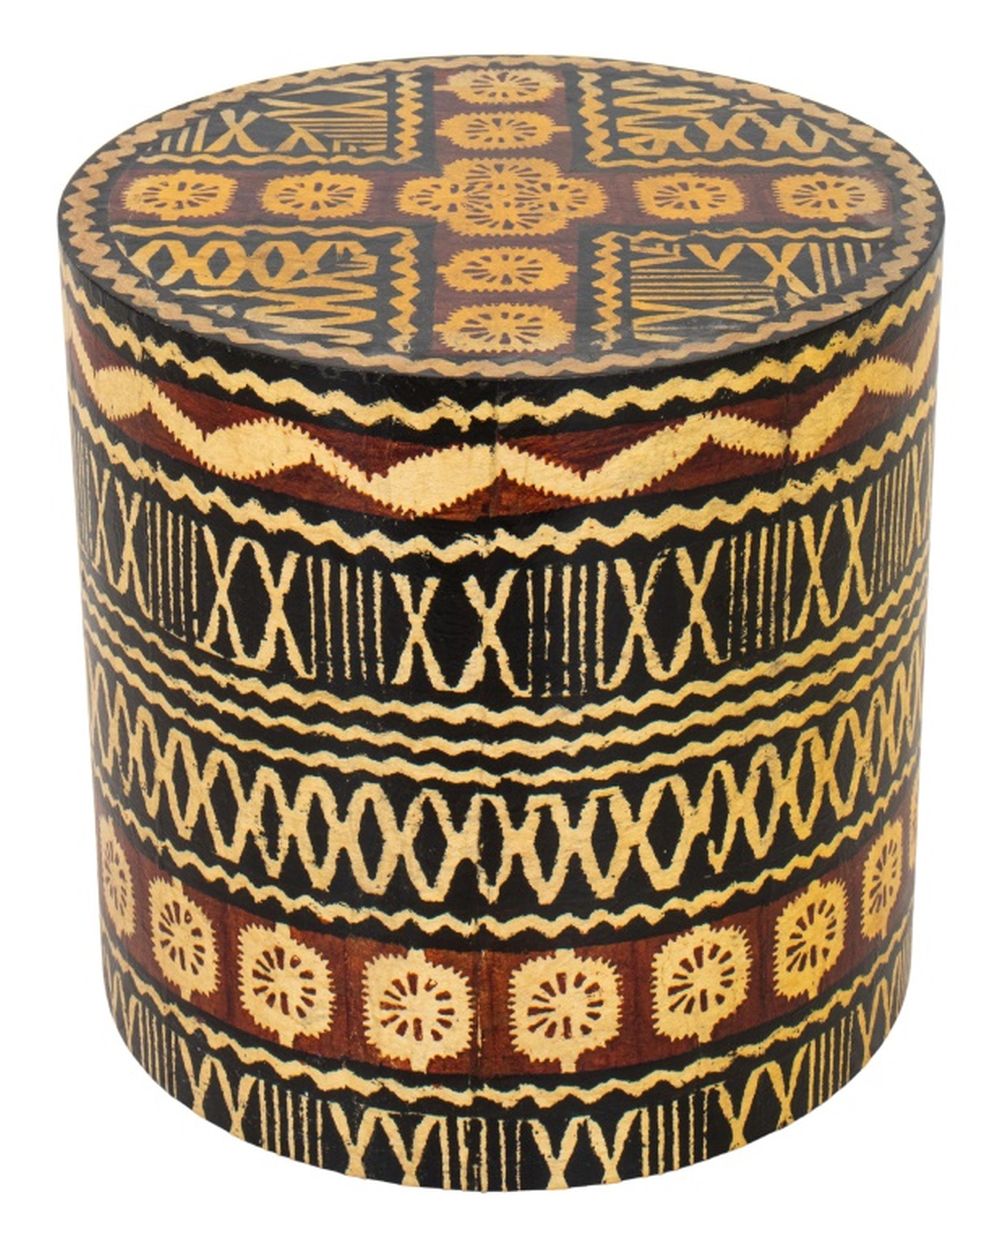 AFRICAN MUDCLOTH PATTERNED CERAMIC 2bbf12